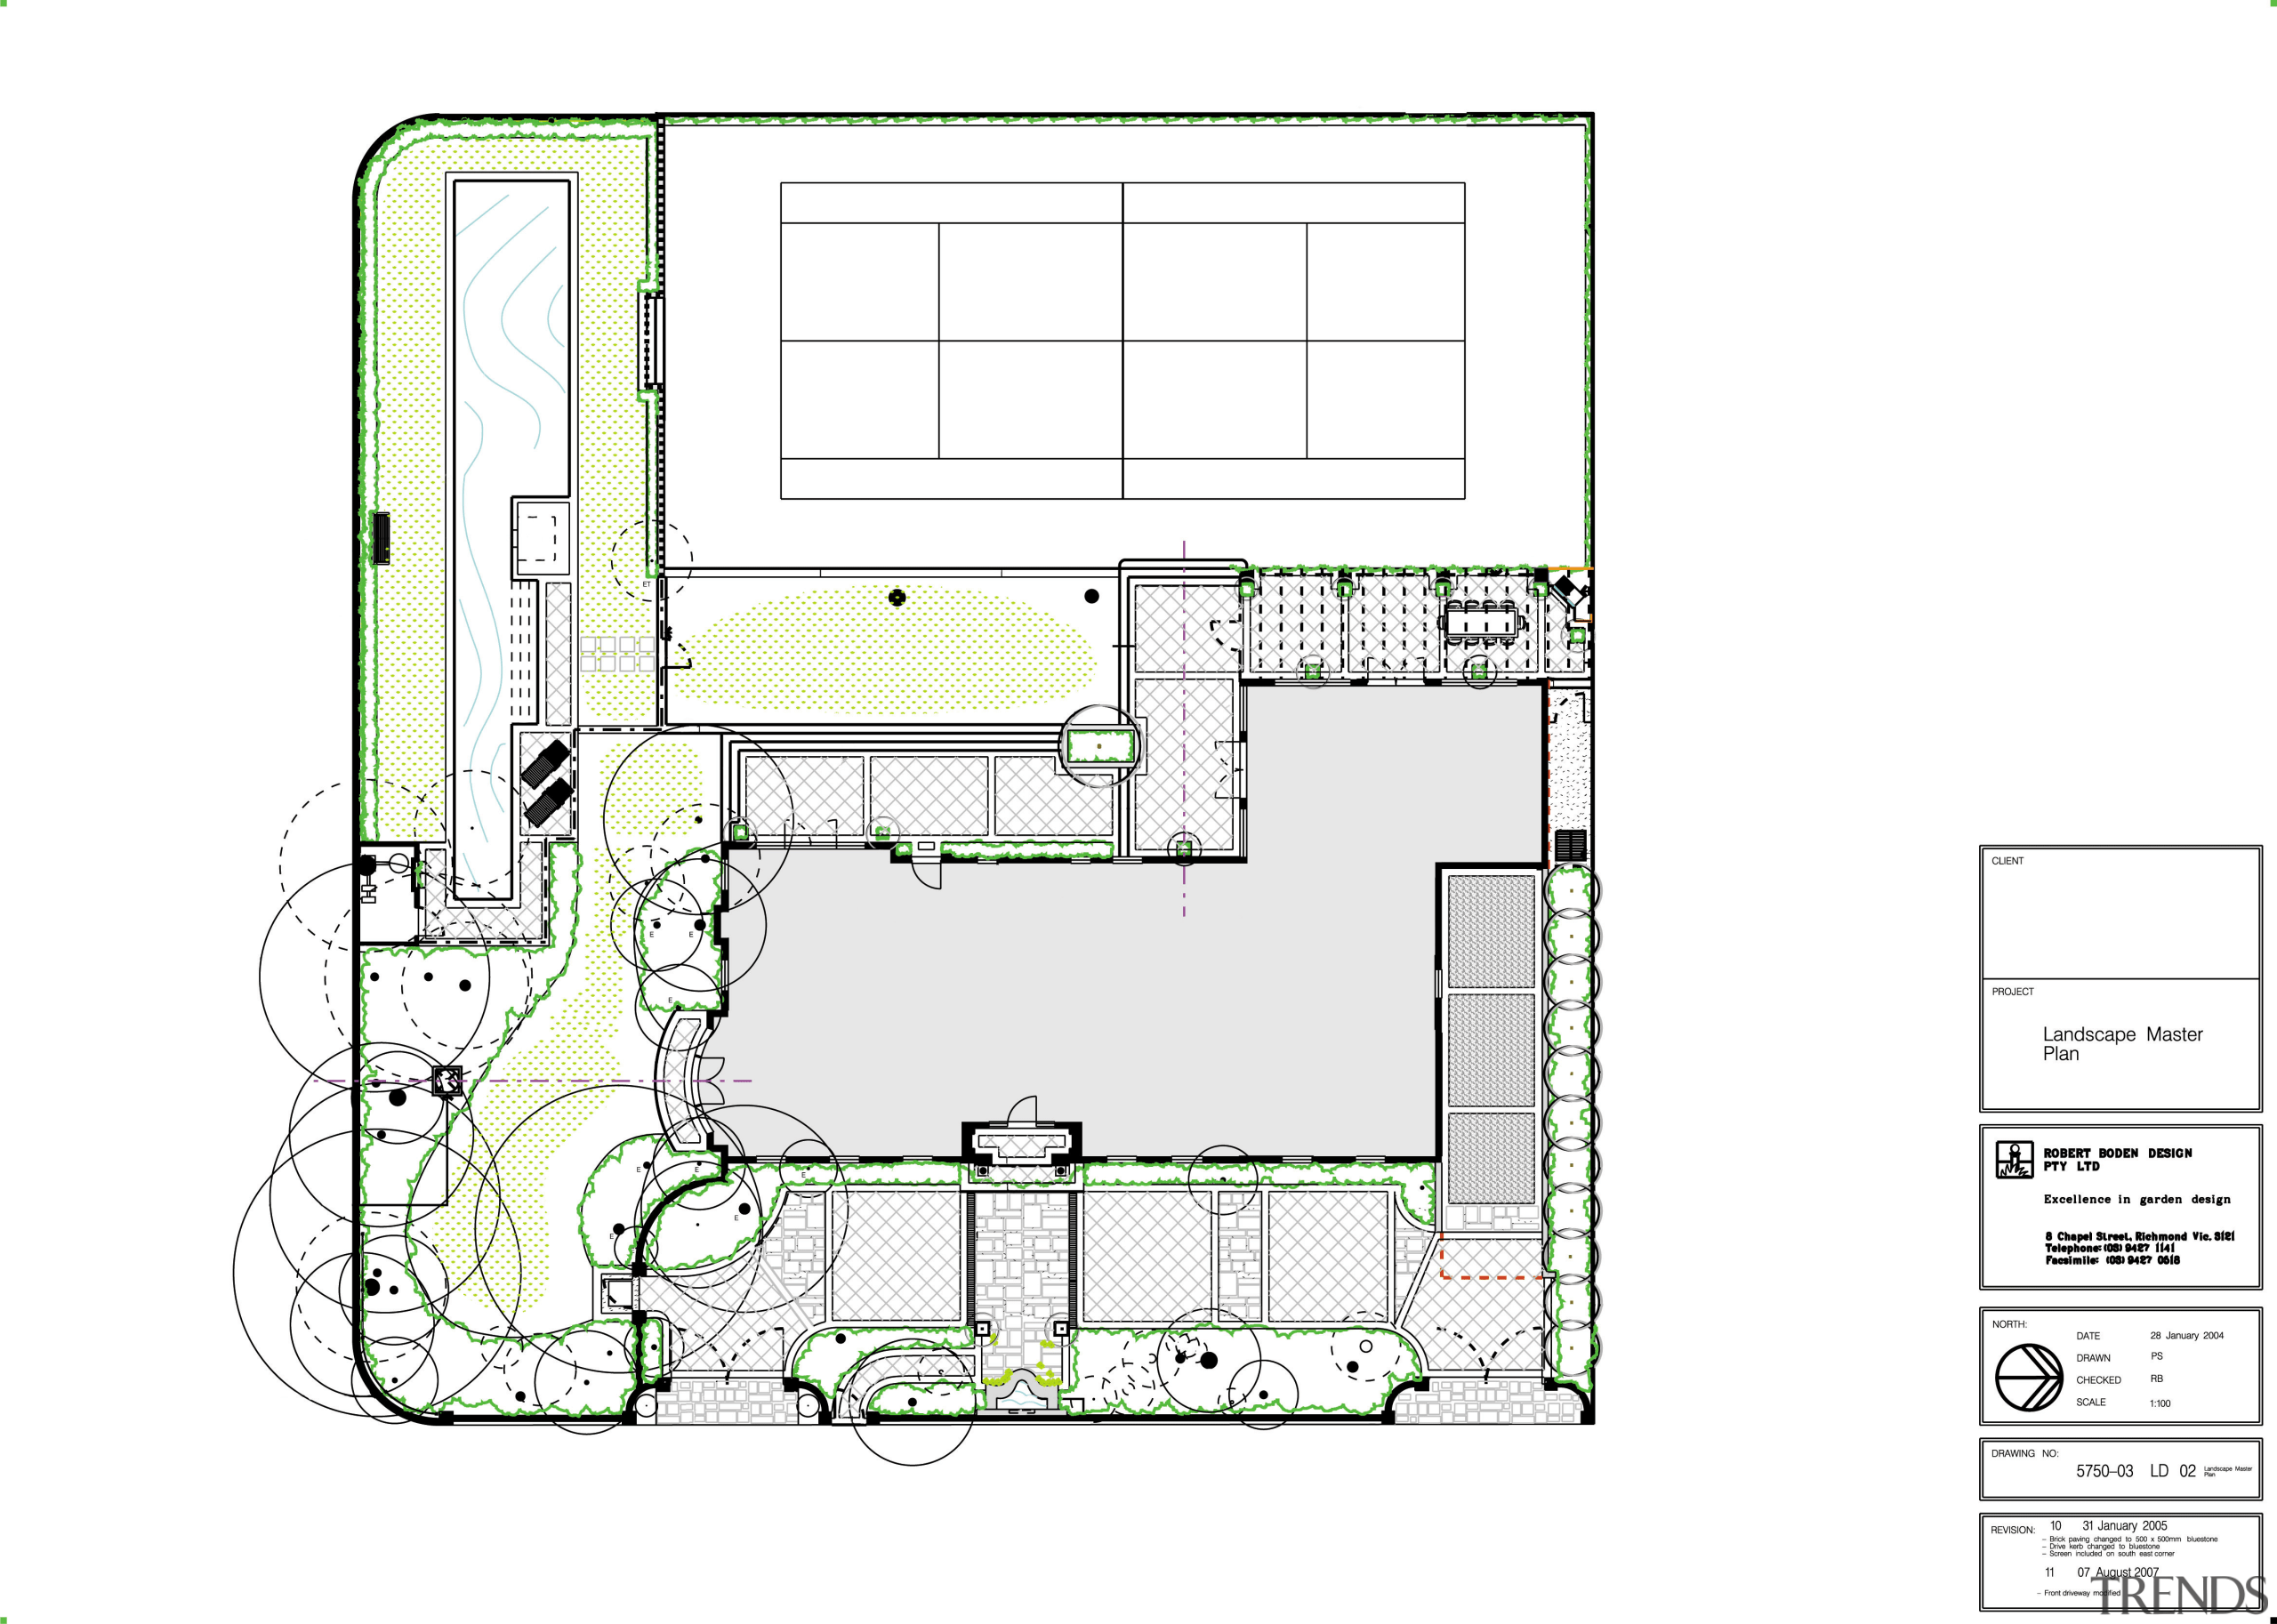 Plan view of the property showing the house area, drawing, floor plan, land lot, line, plan, product design, technical drawing, white